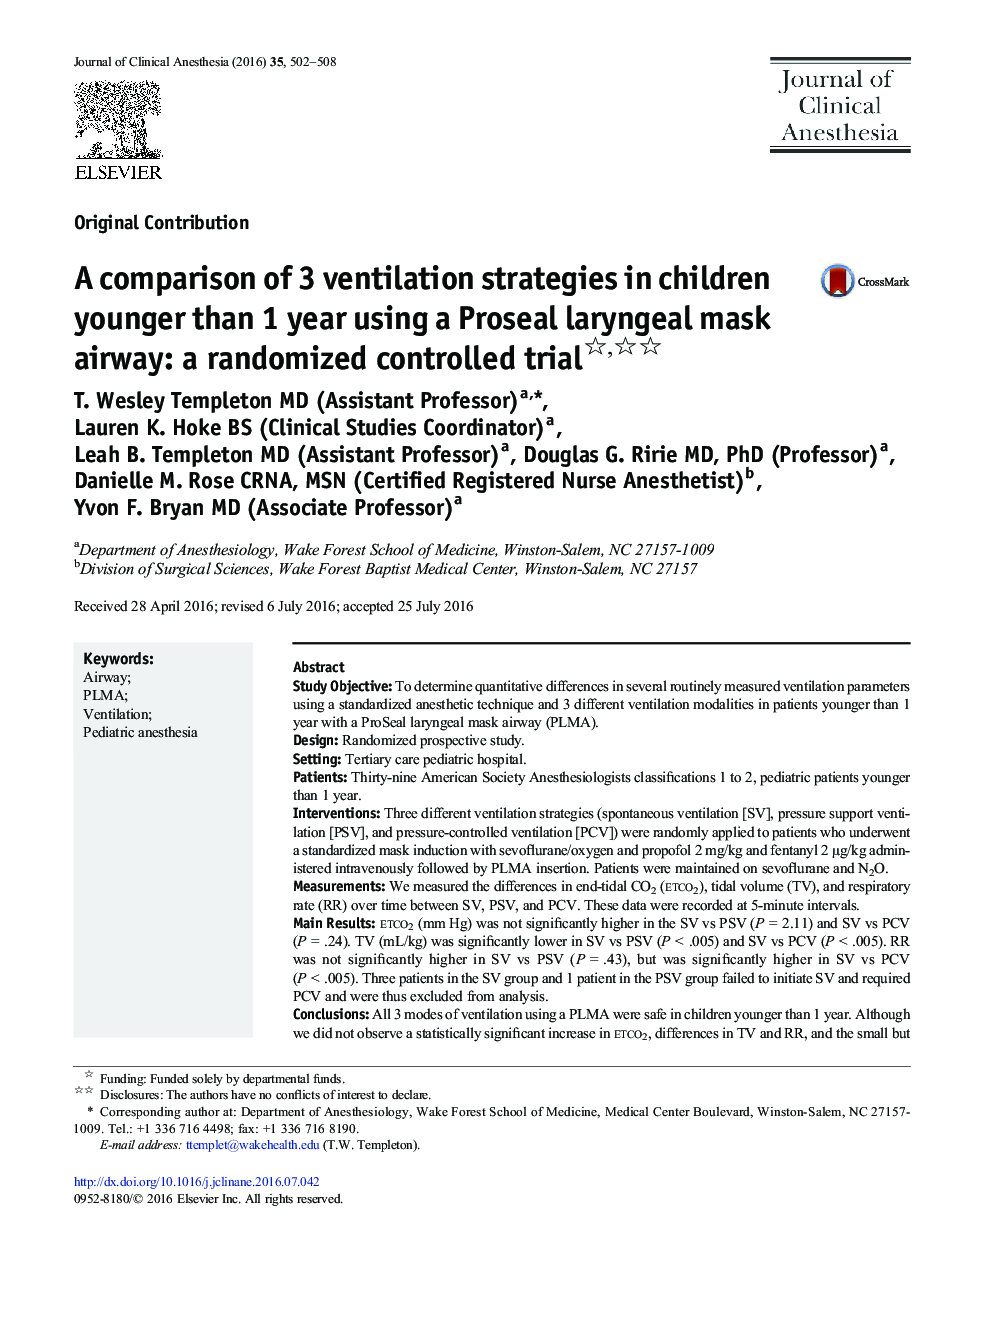 A comparison of 3 ventilation strategies in children younger than 1 year using a Proseal laryngeal mask airway: a randomized controlled trial